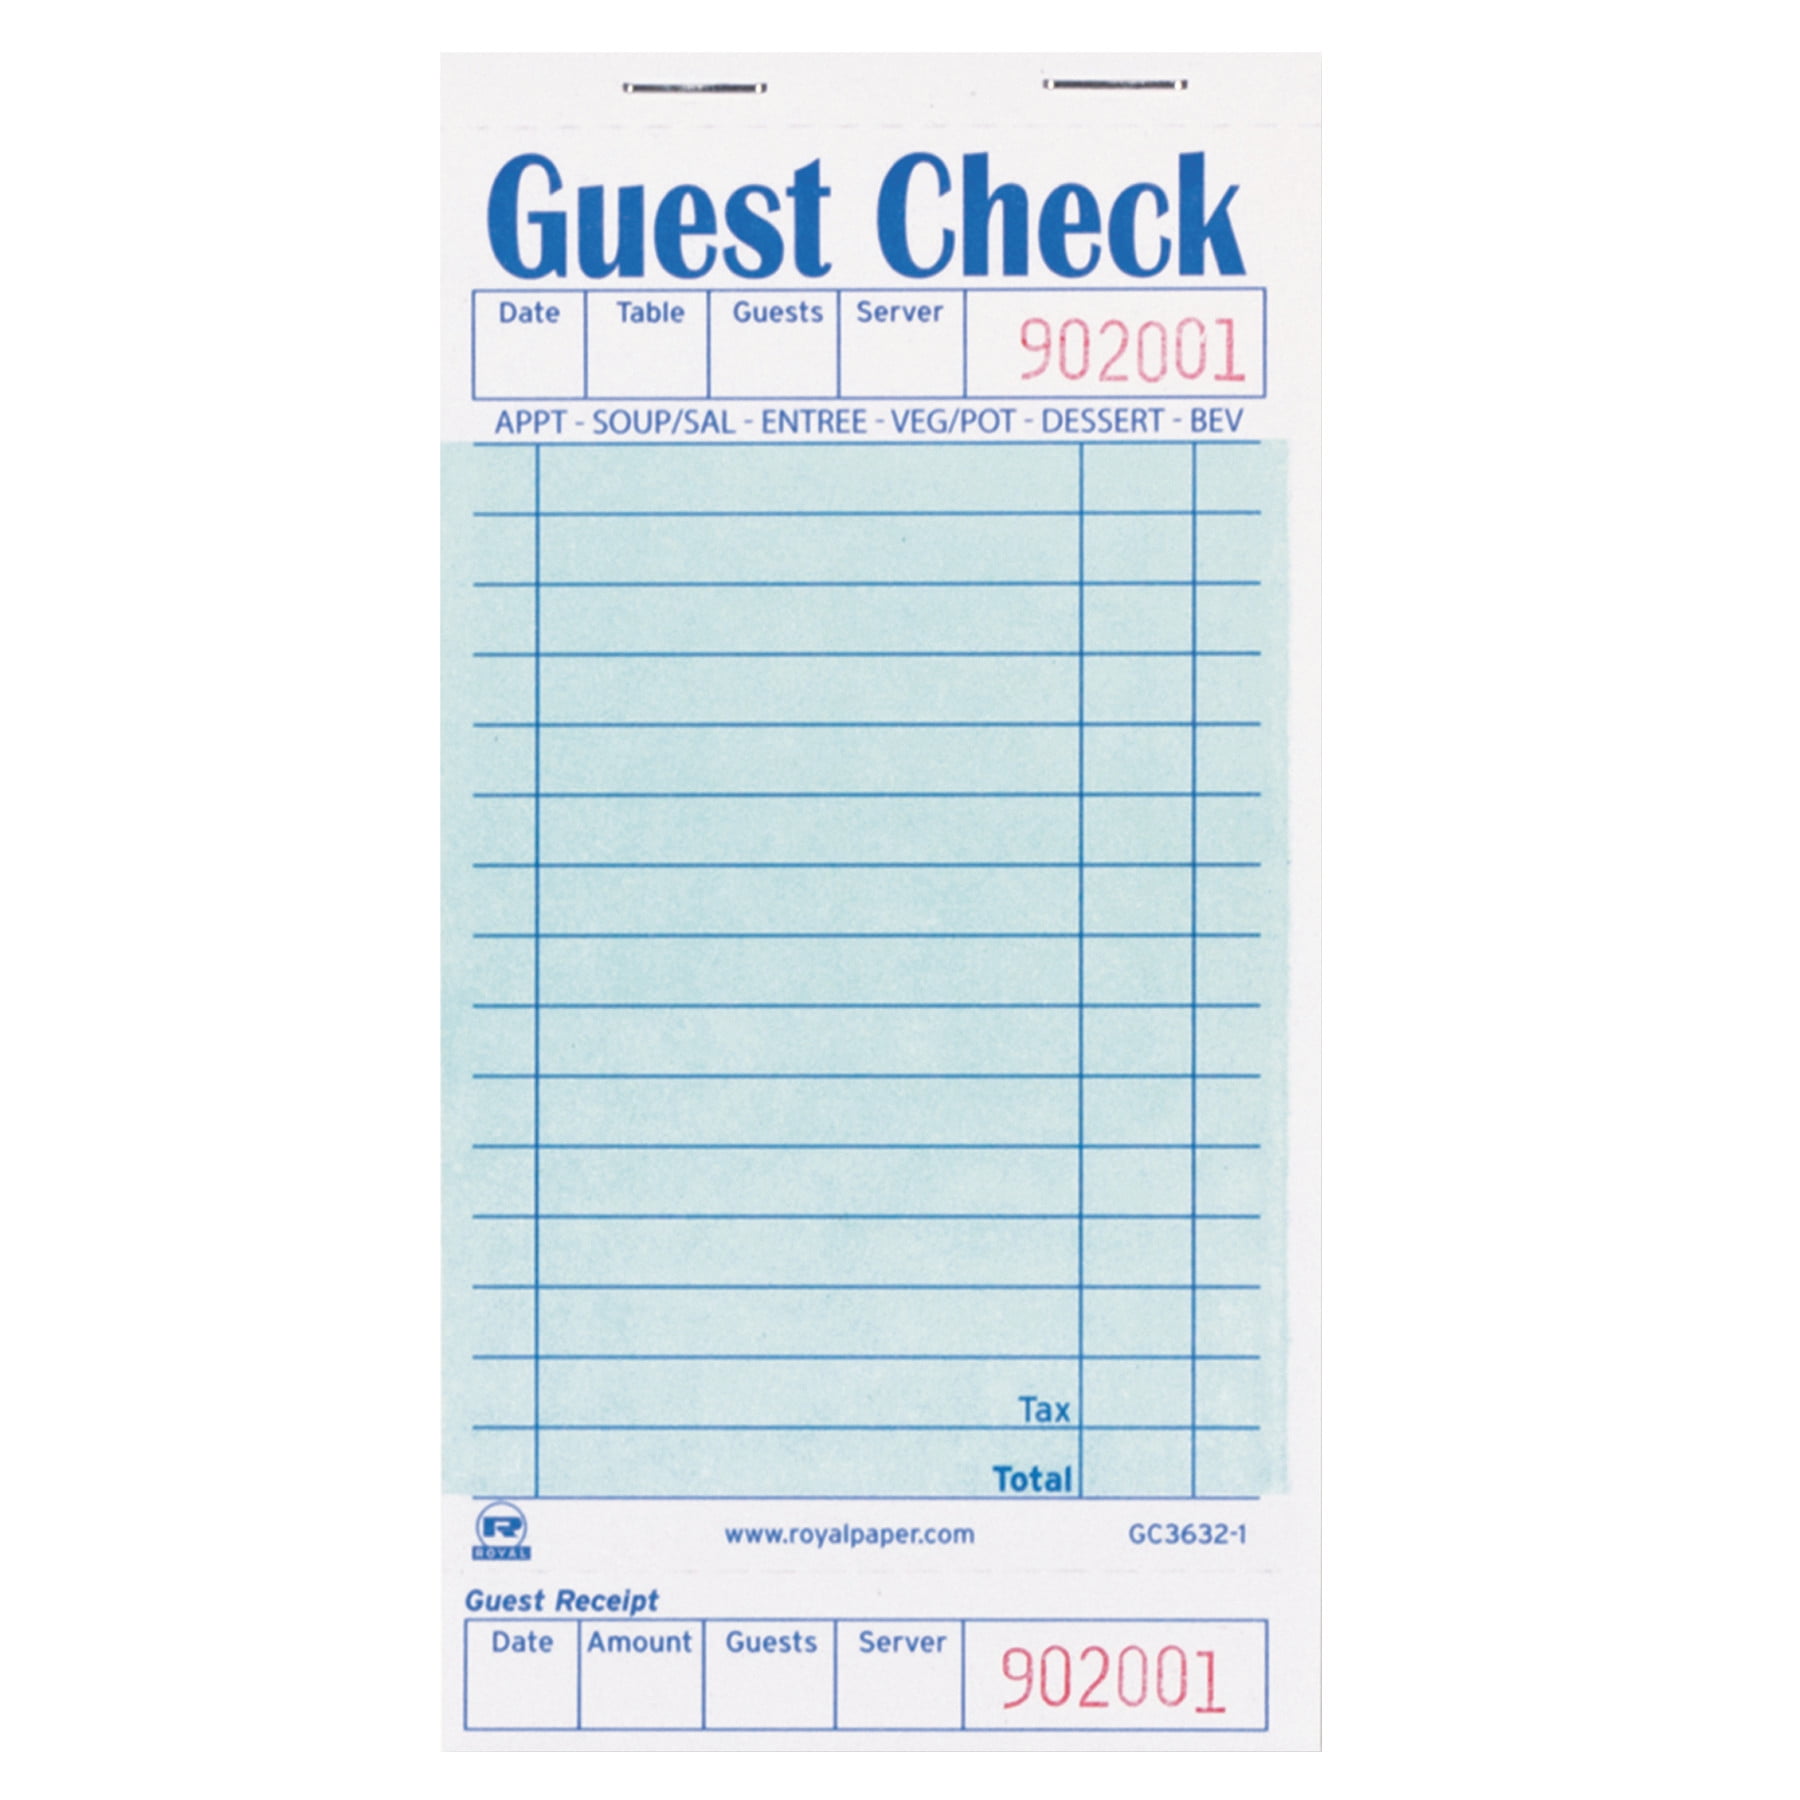 Green New Version Royal Green Guest Check Board 1 Part Booked with 15 Lines Package of 10 Books